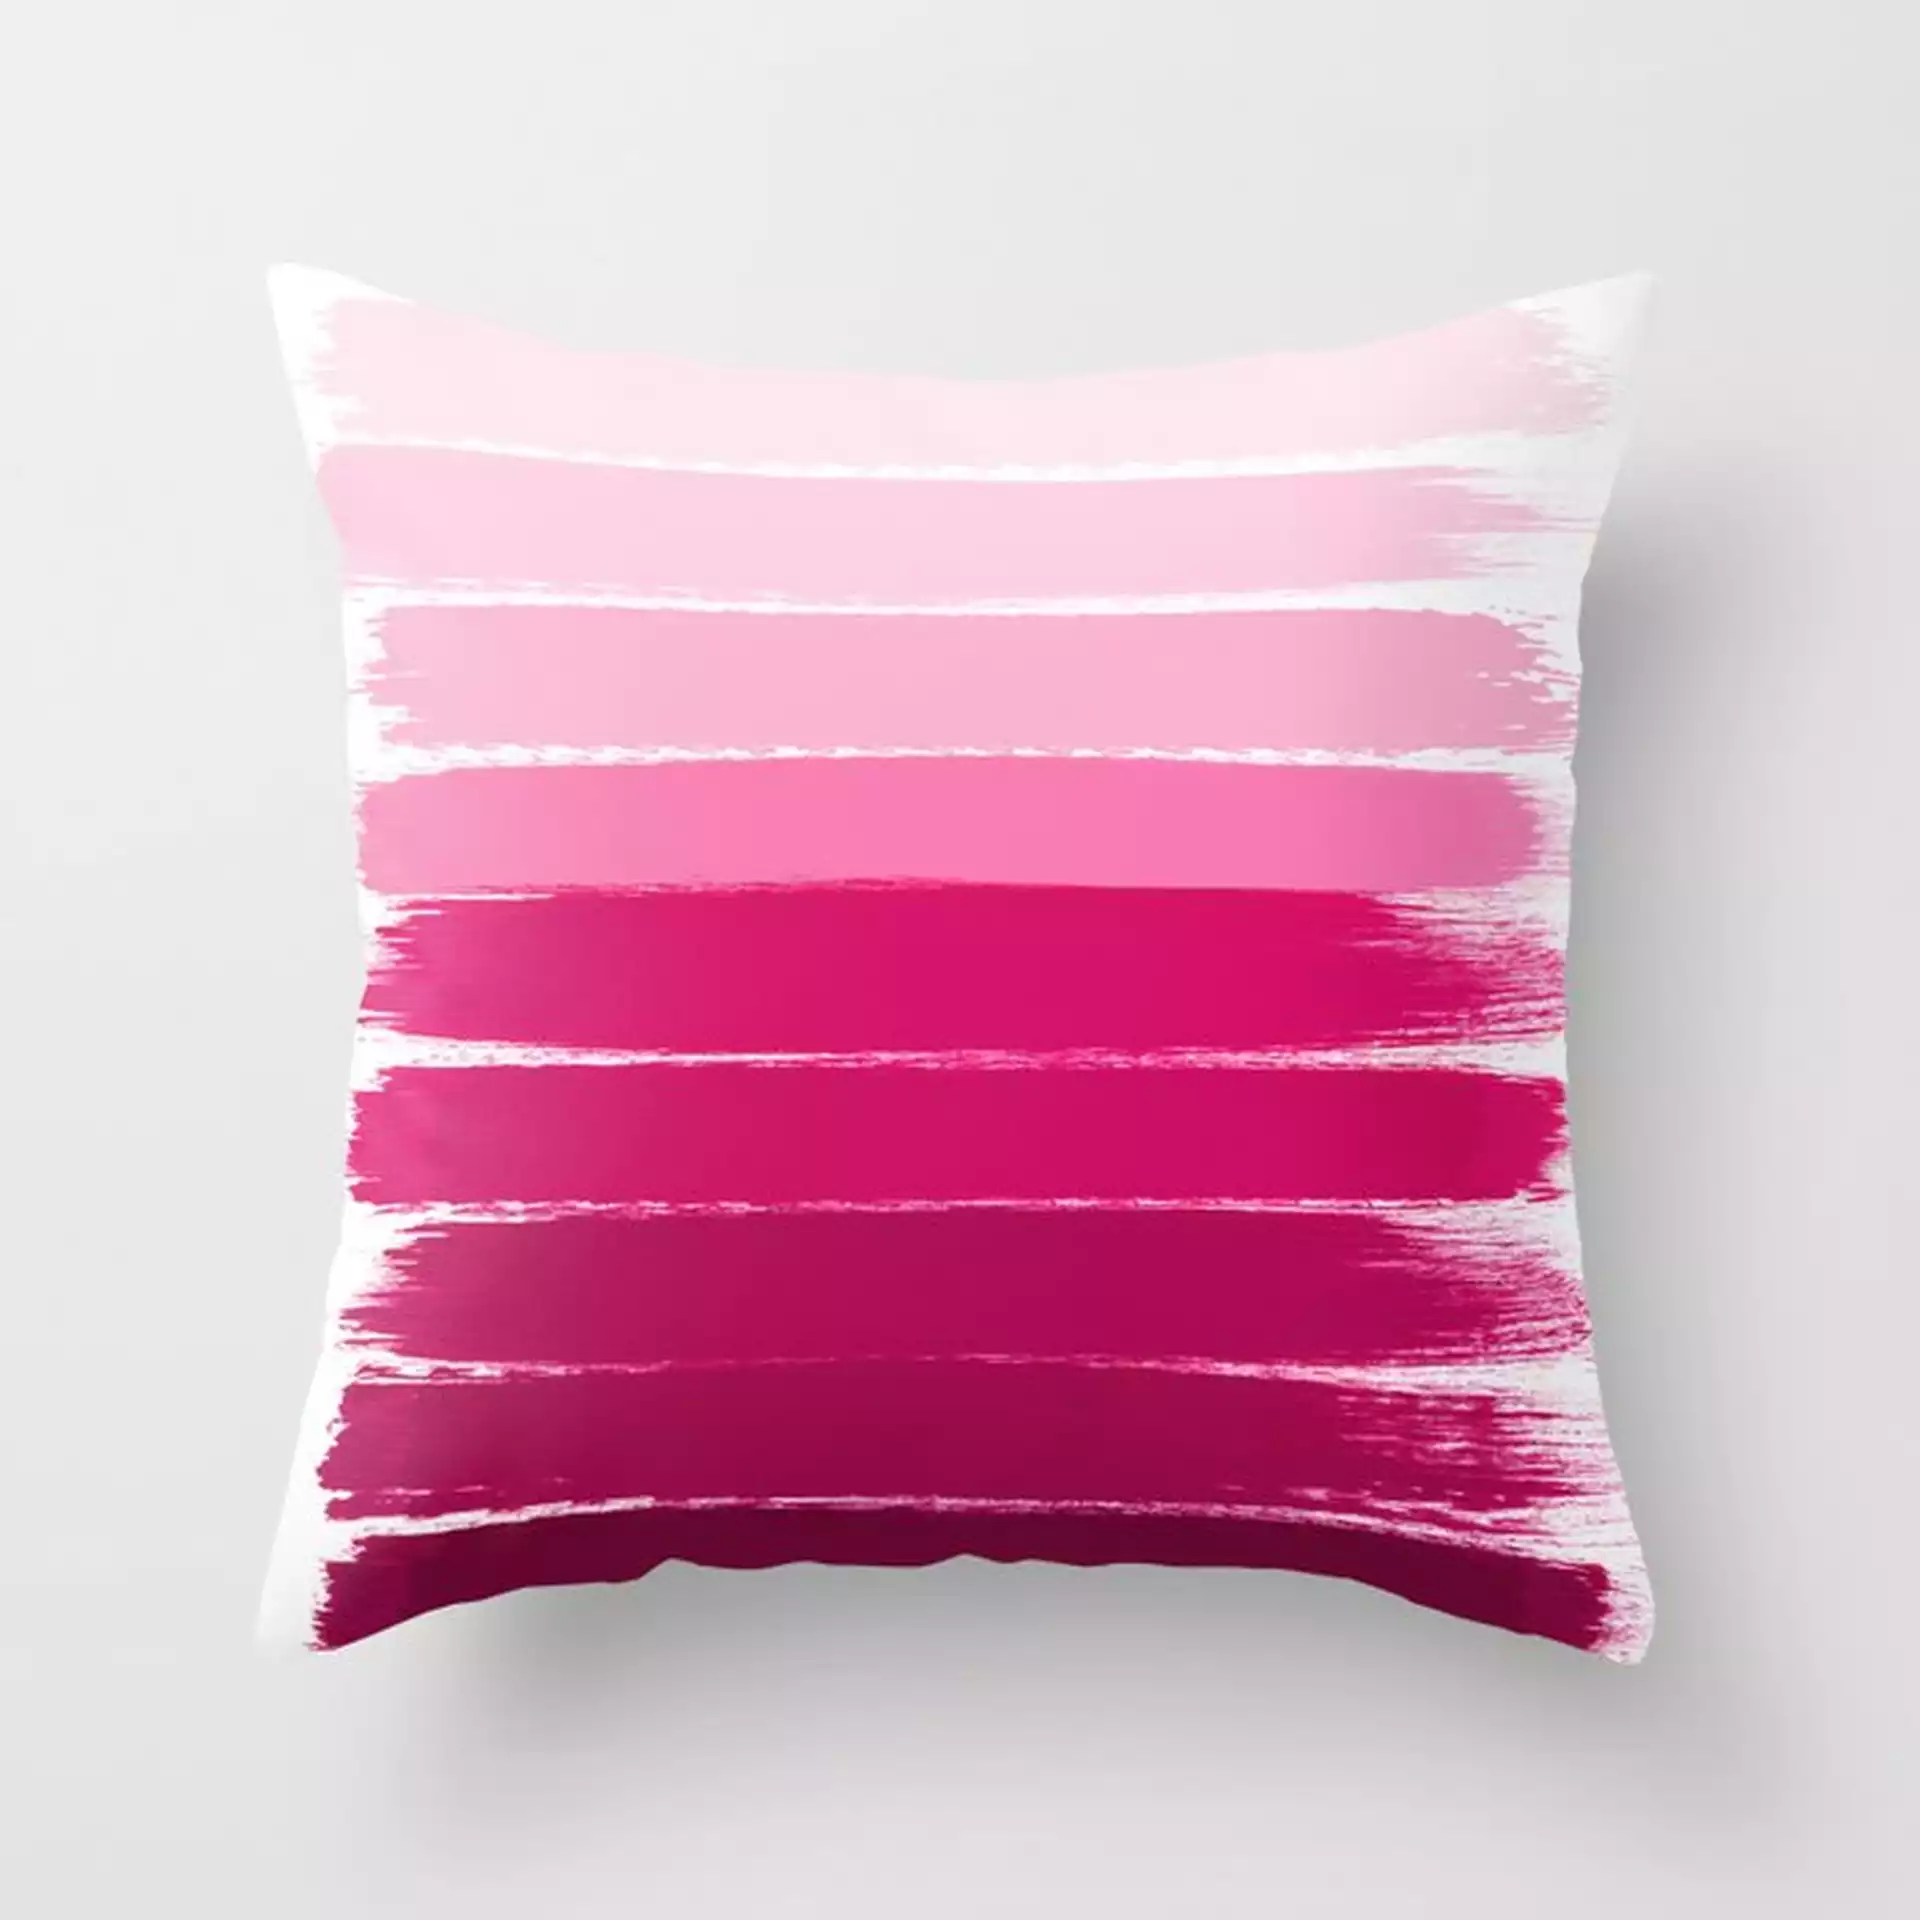 Mola - Ombre Painting Bruskstrokes Tonal Gradient Art Pink Pastel To Hot Pink Decor Couch Throw Pillow by Charlottewinter - Cover (18" x 18") with pillow insert - Outdoor Pillow